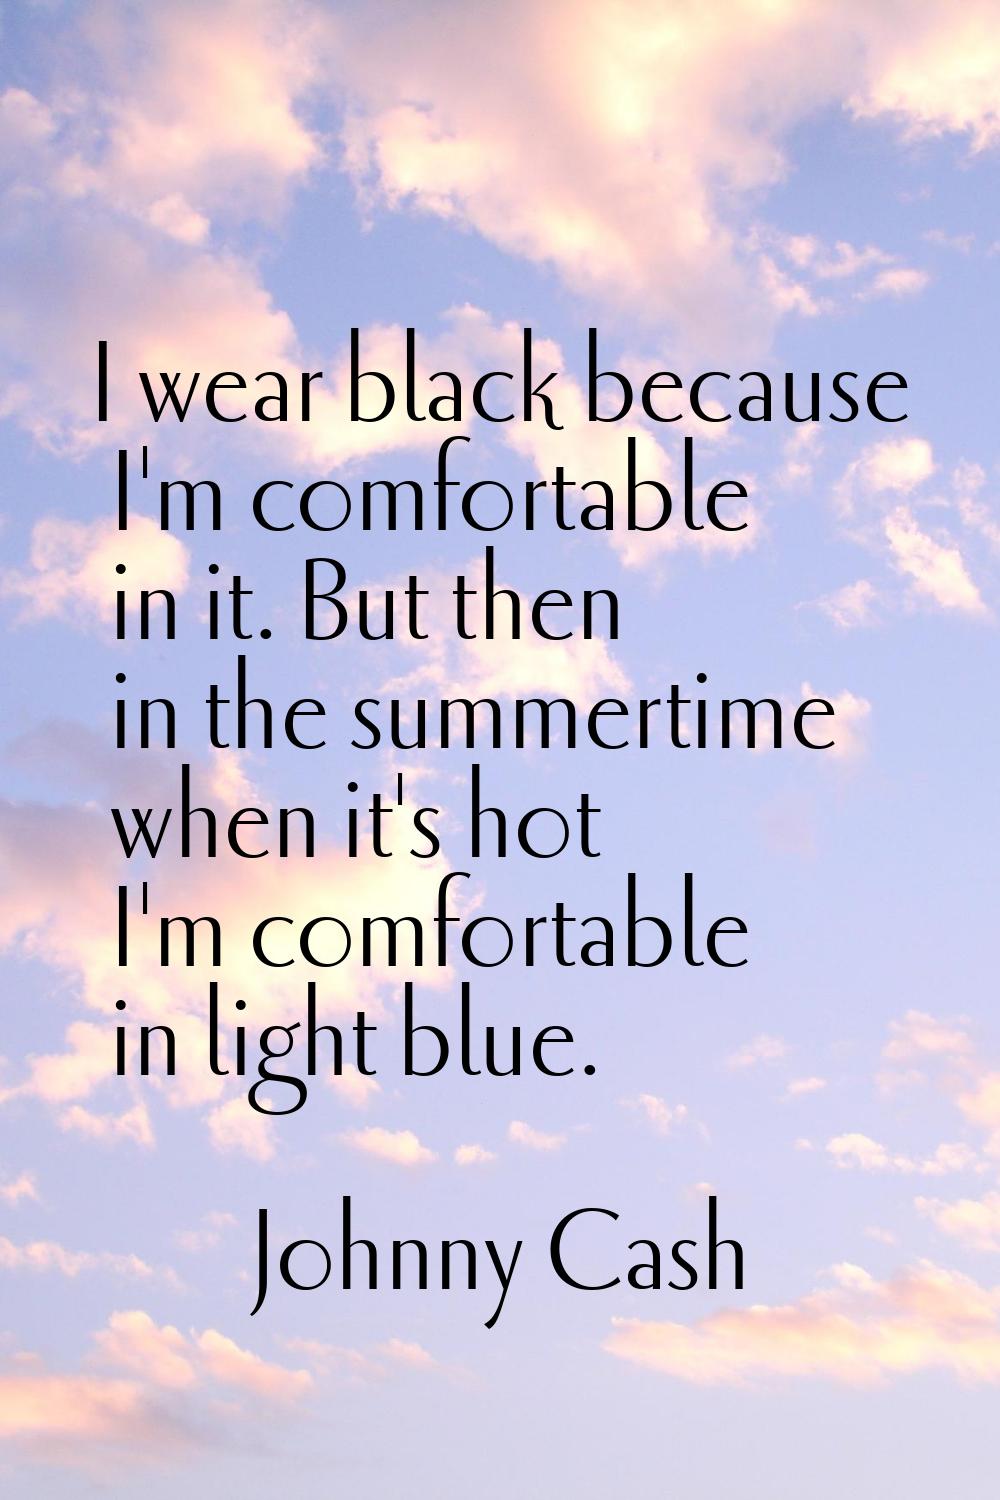 I wear black because I'm comfortable in it. But then in the summertime when it's hot I'm comfortabl